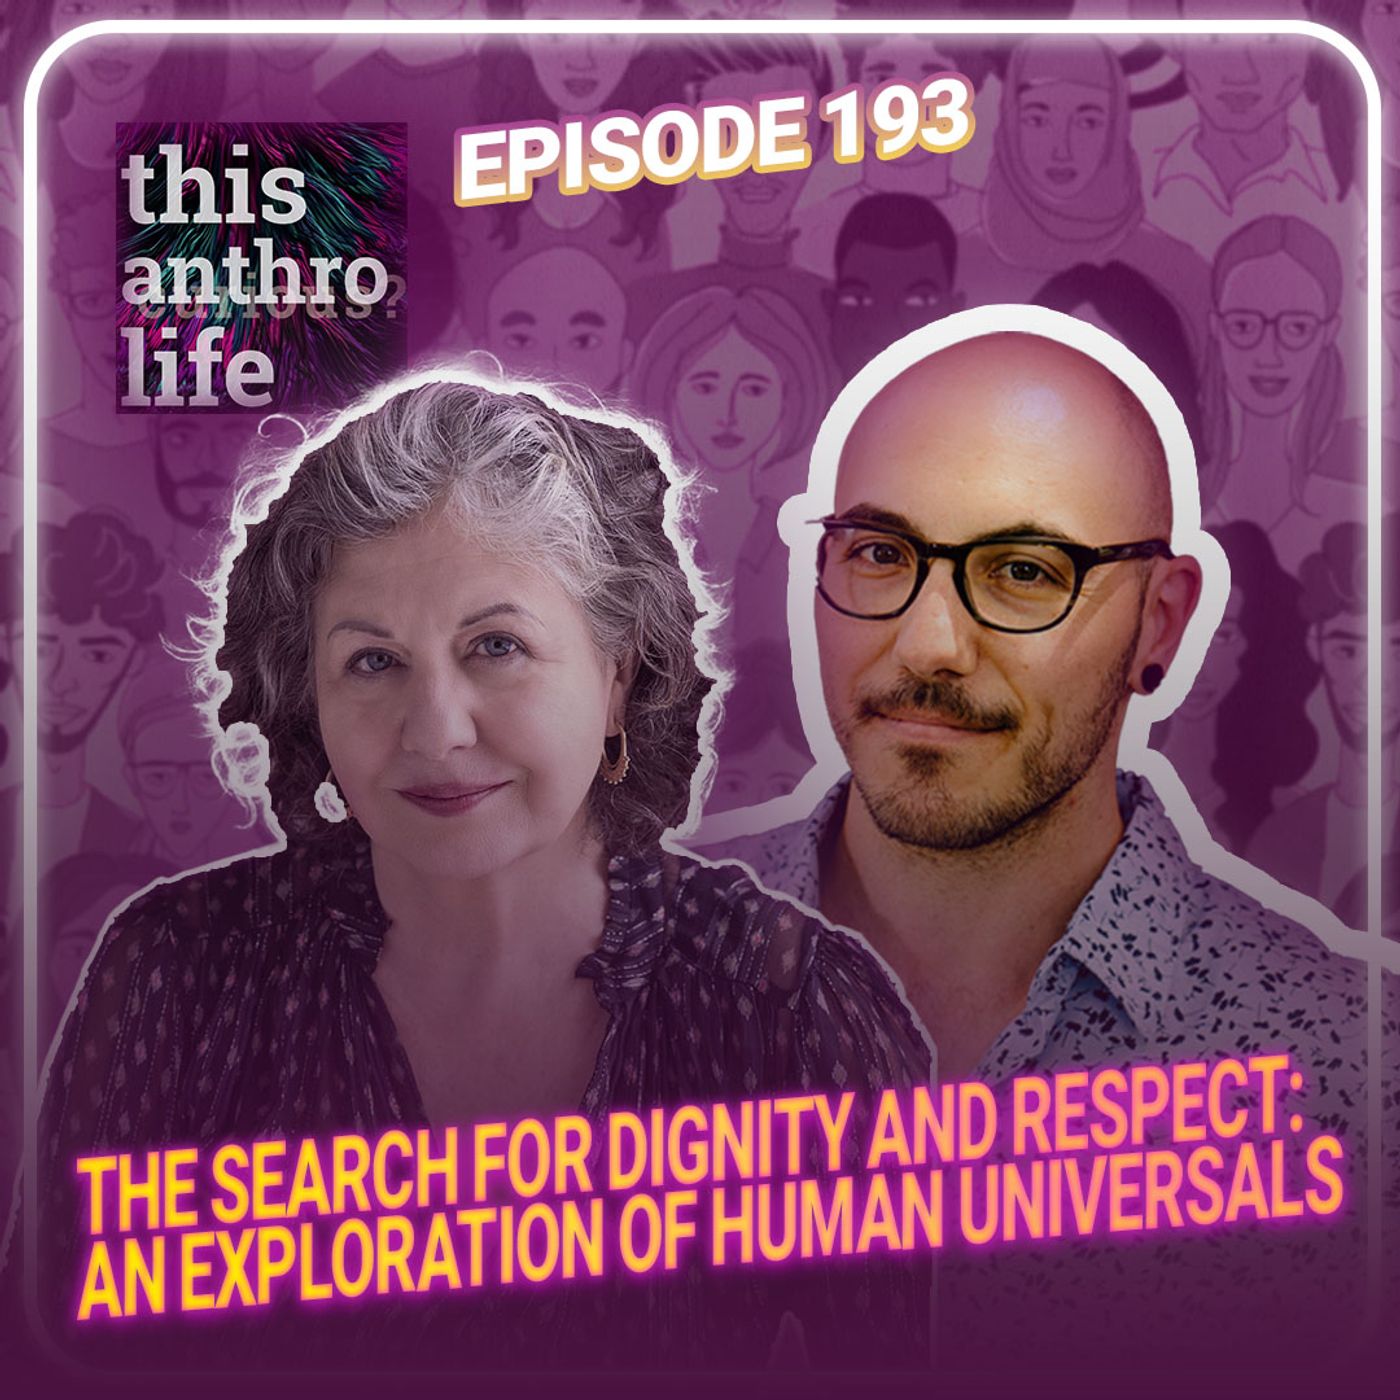 The Search for Dignity and Respect: An Exploration of Human Universals